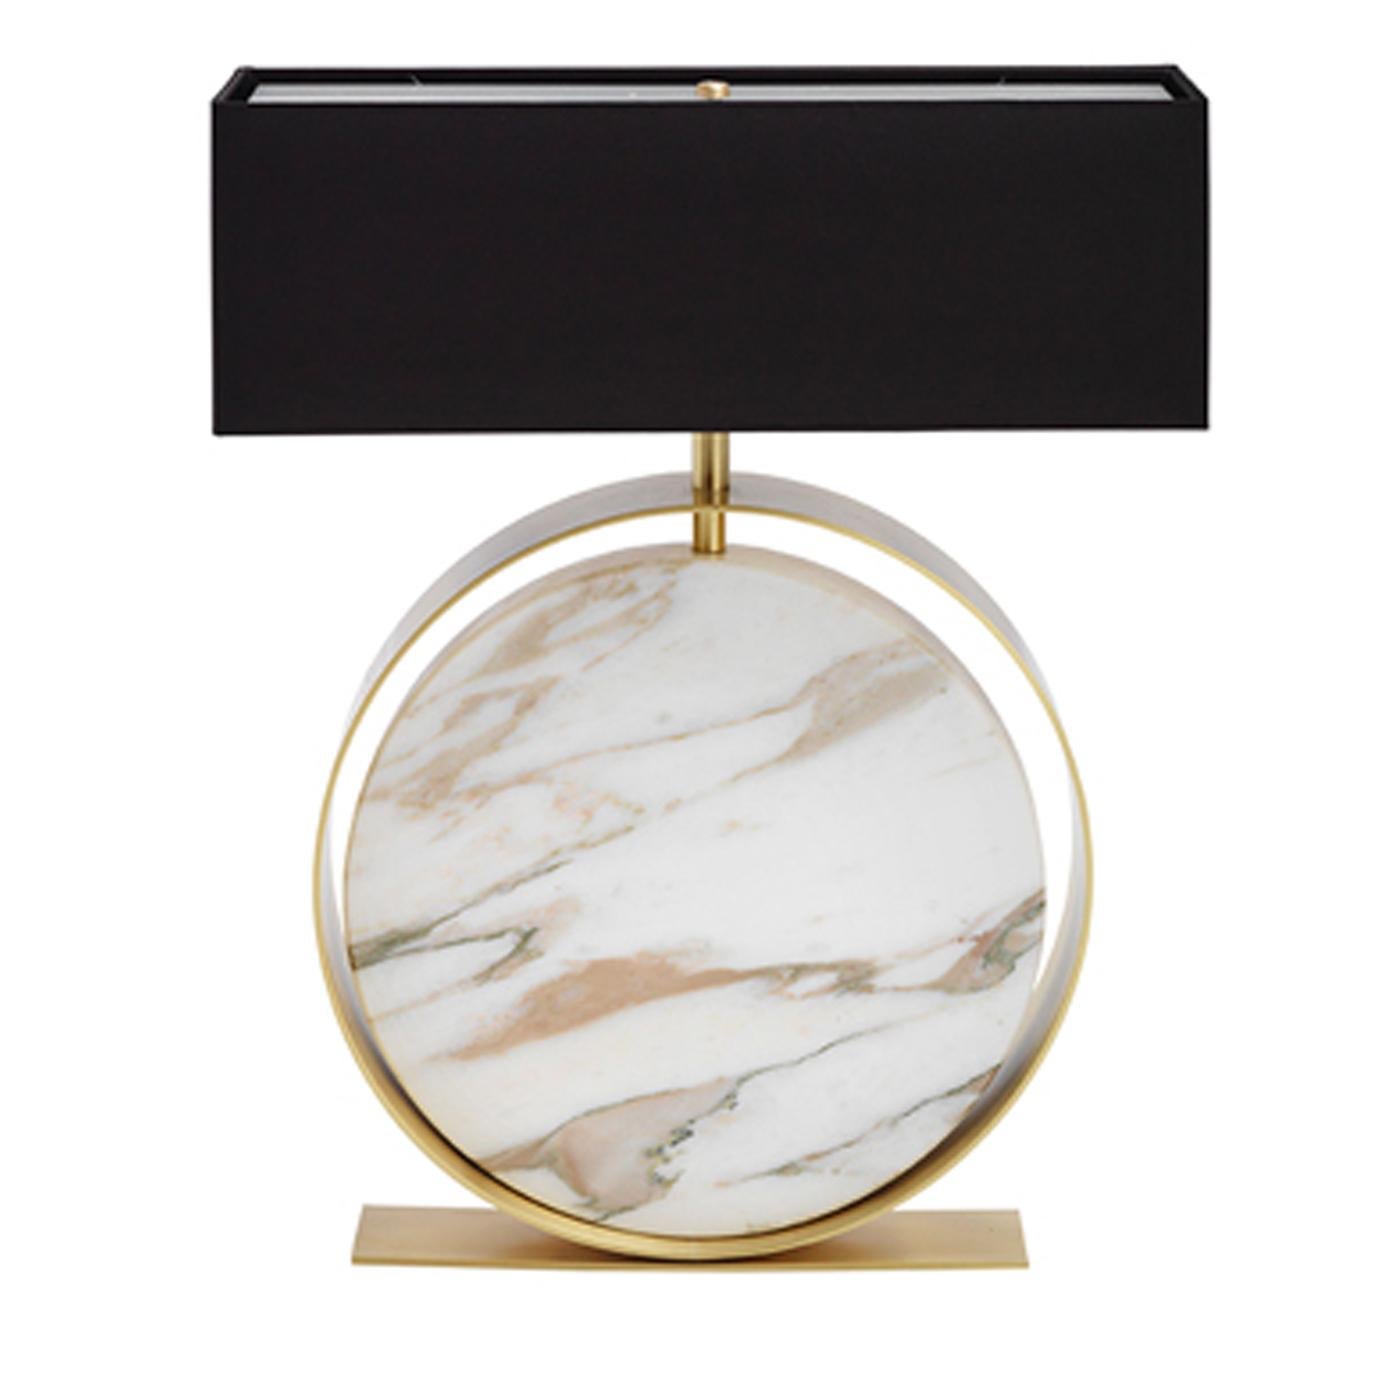 From a collection of marble table lamps in three different shapes, the Caccia Round Table Lamp is slightly quirky, but all luxury. Featuring a circular slab of Calcutta gold marble surrounded by a brass ring with a satin finish, the lamp is topped